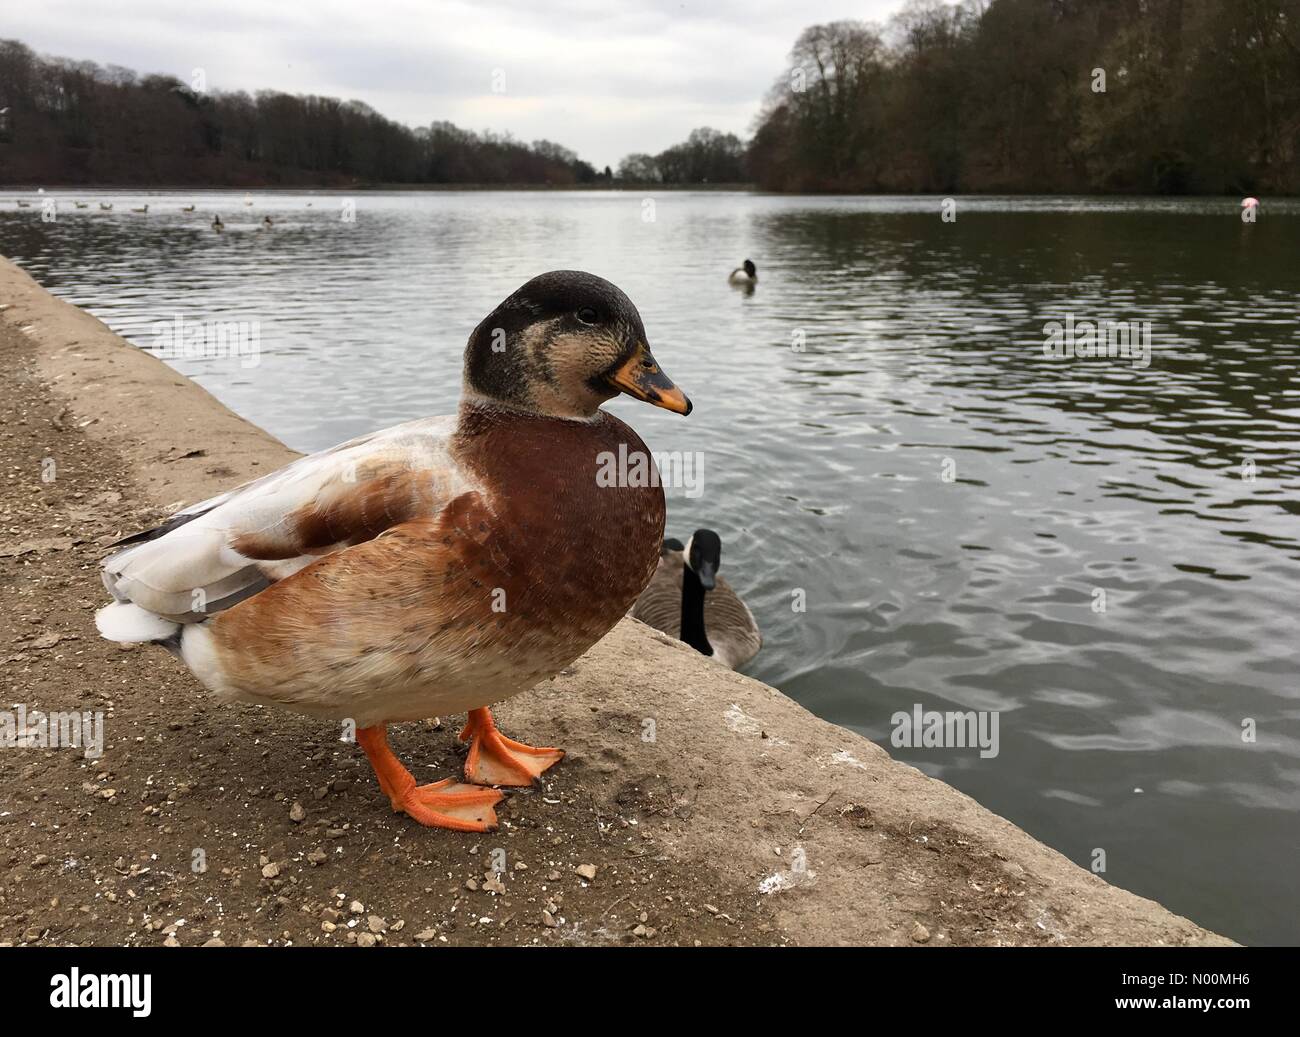 UK weather - 22nd March 2018 A cool overcast day at Roundhay Park in Leeds, Yorkshire. This duck was pondering whether the lake would be too cold or not. Stock Photo